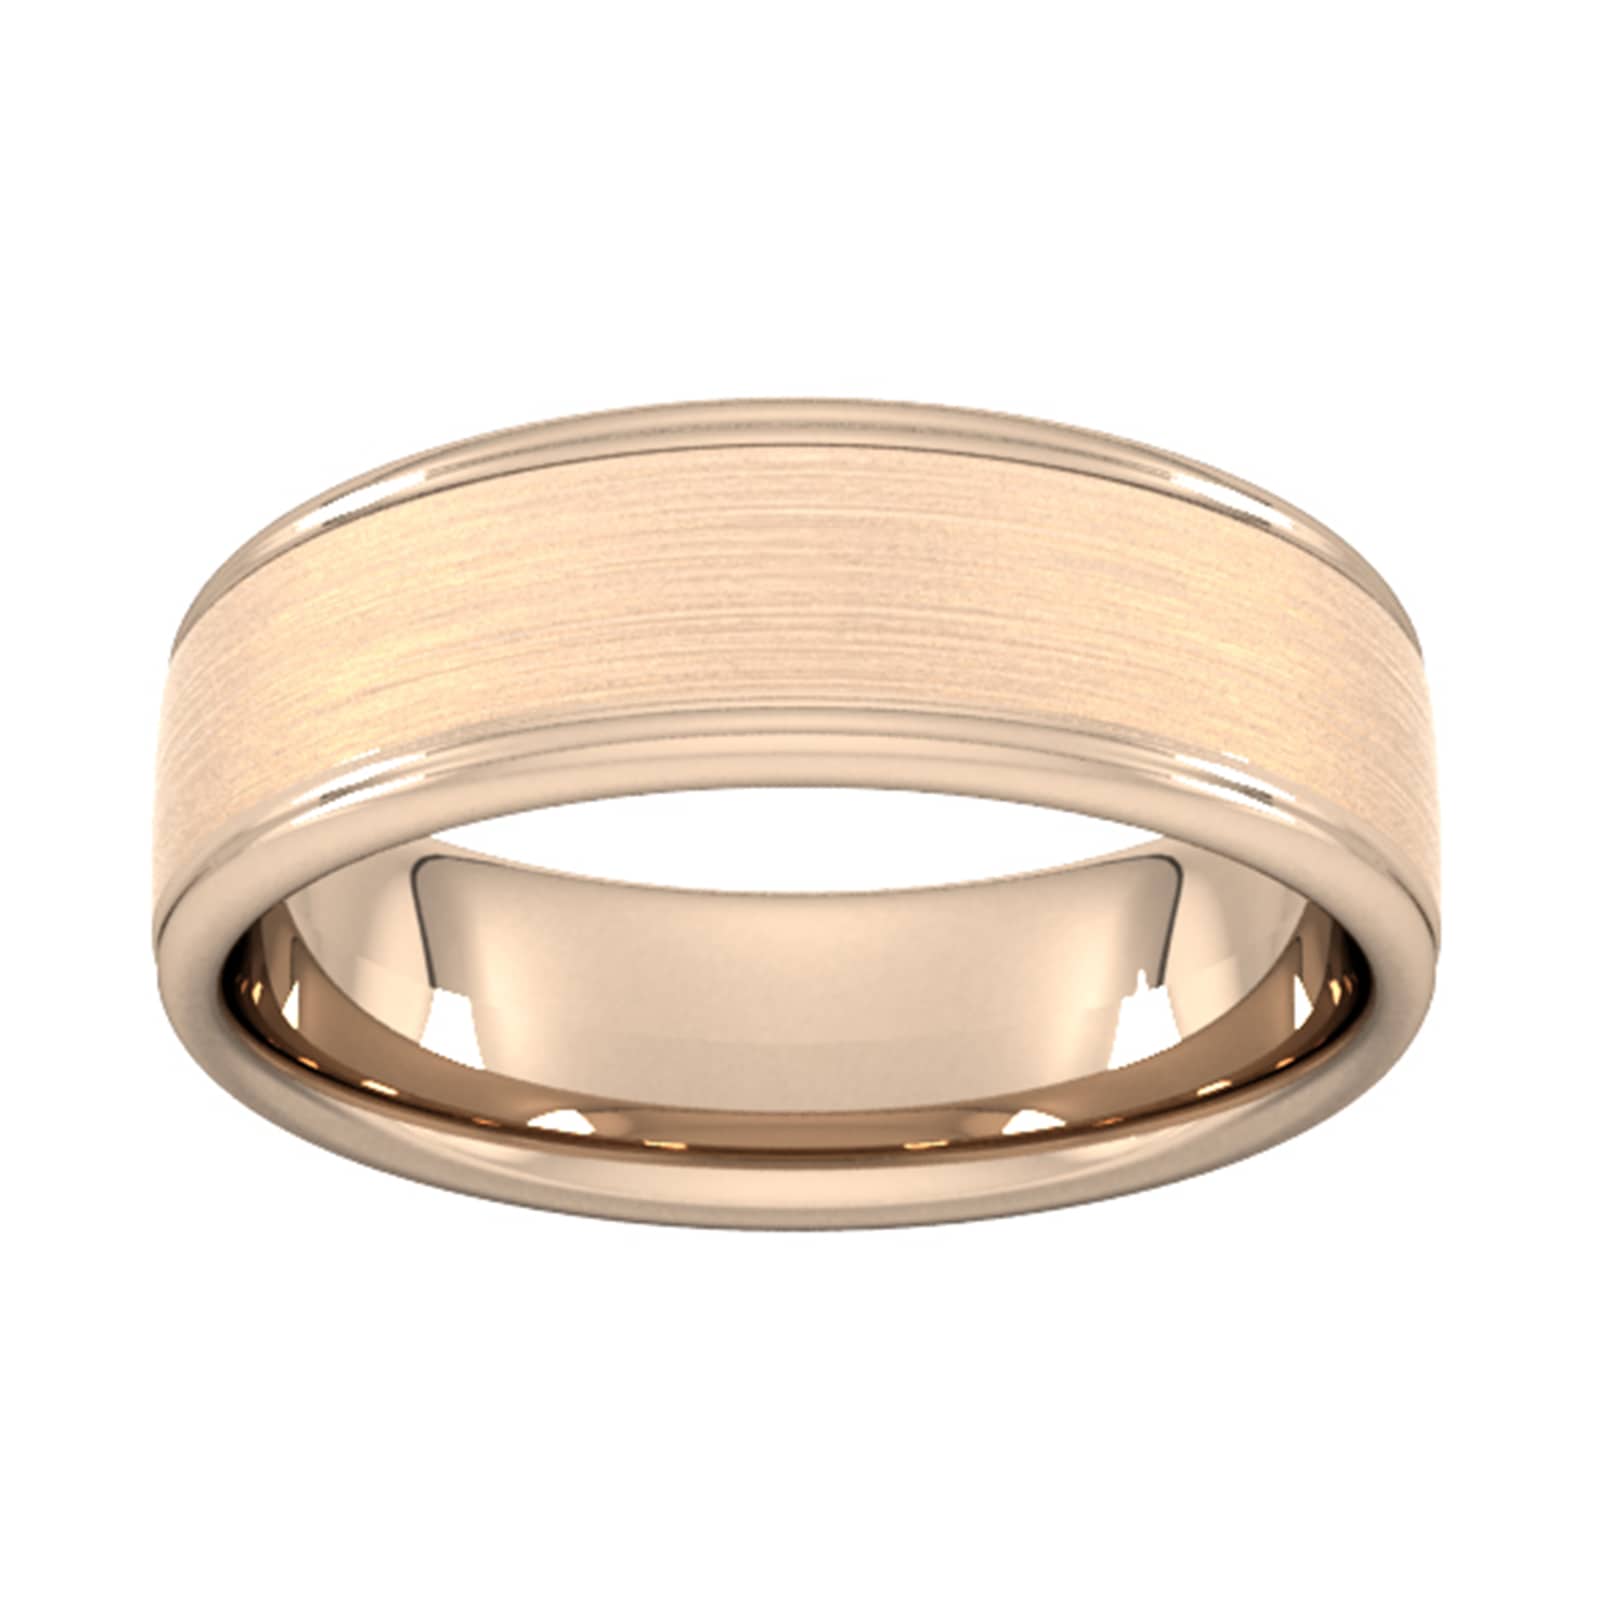 7mm Slight Court Extra Heavy Matt Centre With Grooves Wedding Ring In 9 Carat Rose Gold - Ring Size T